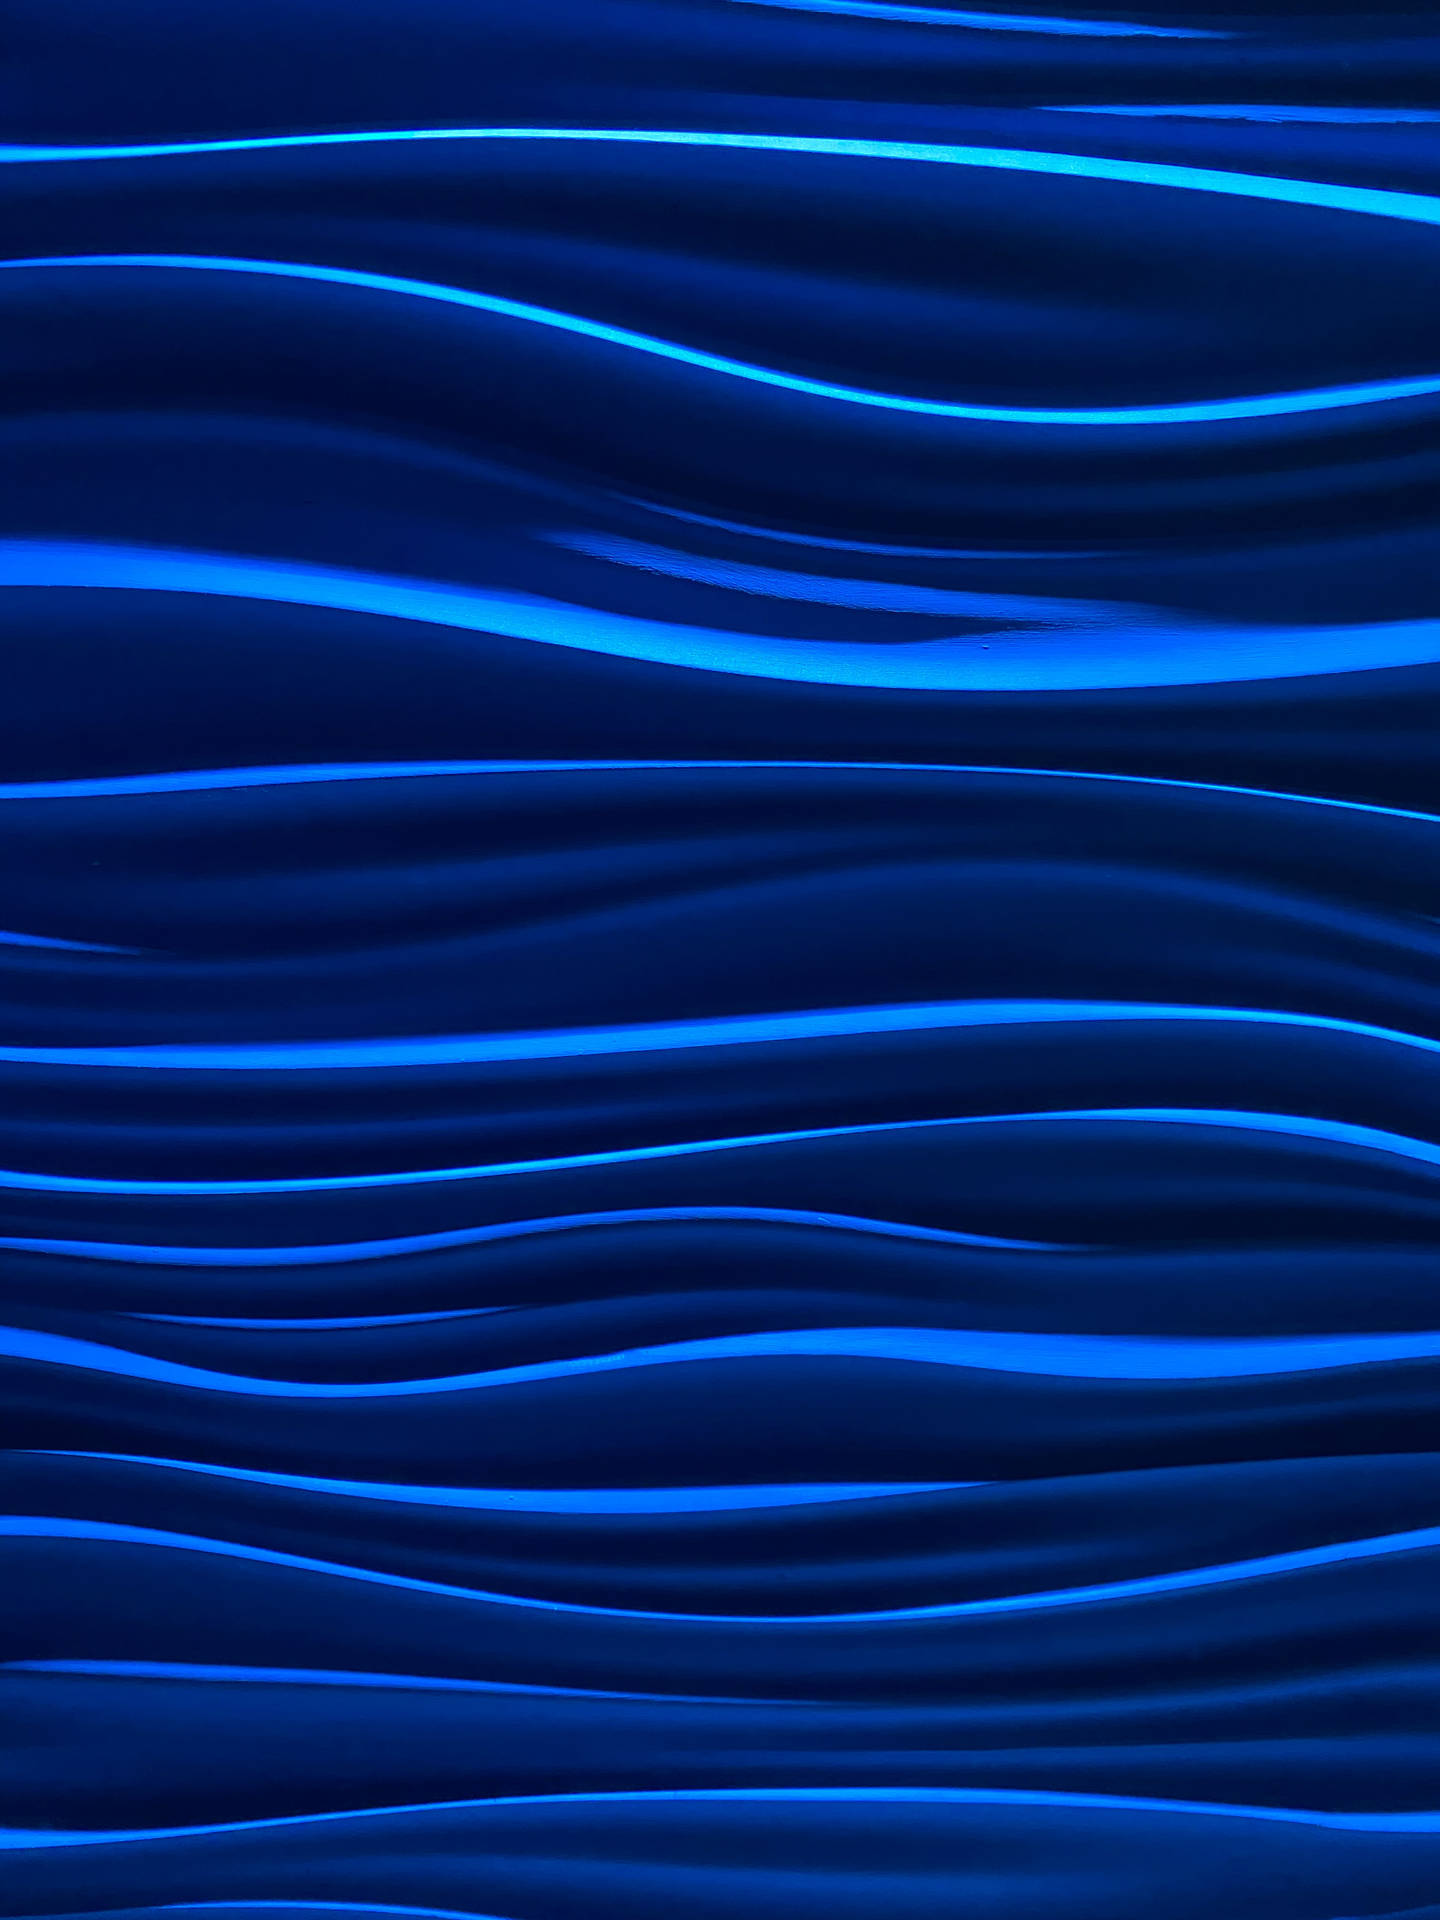 Blue Waves Aesthetic Pattern Background